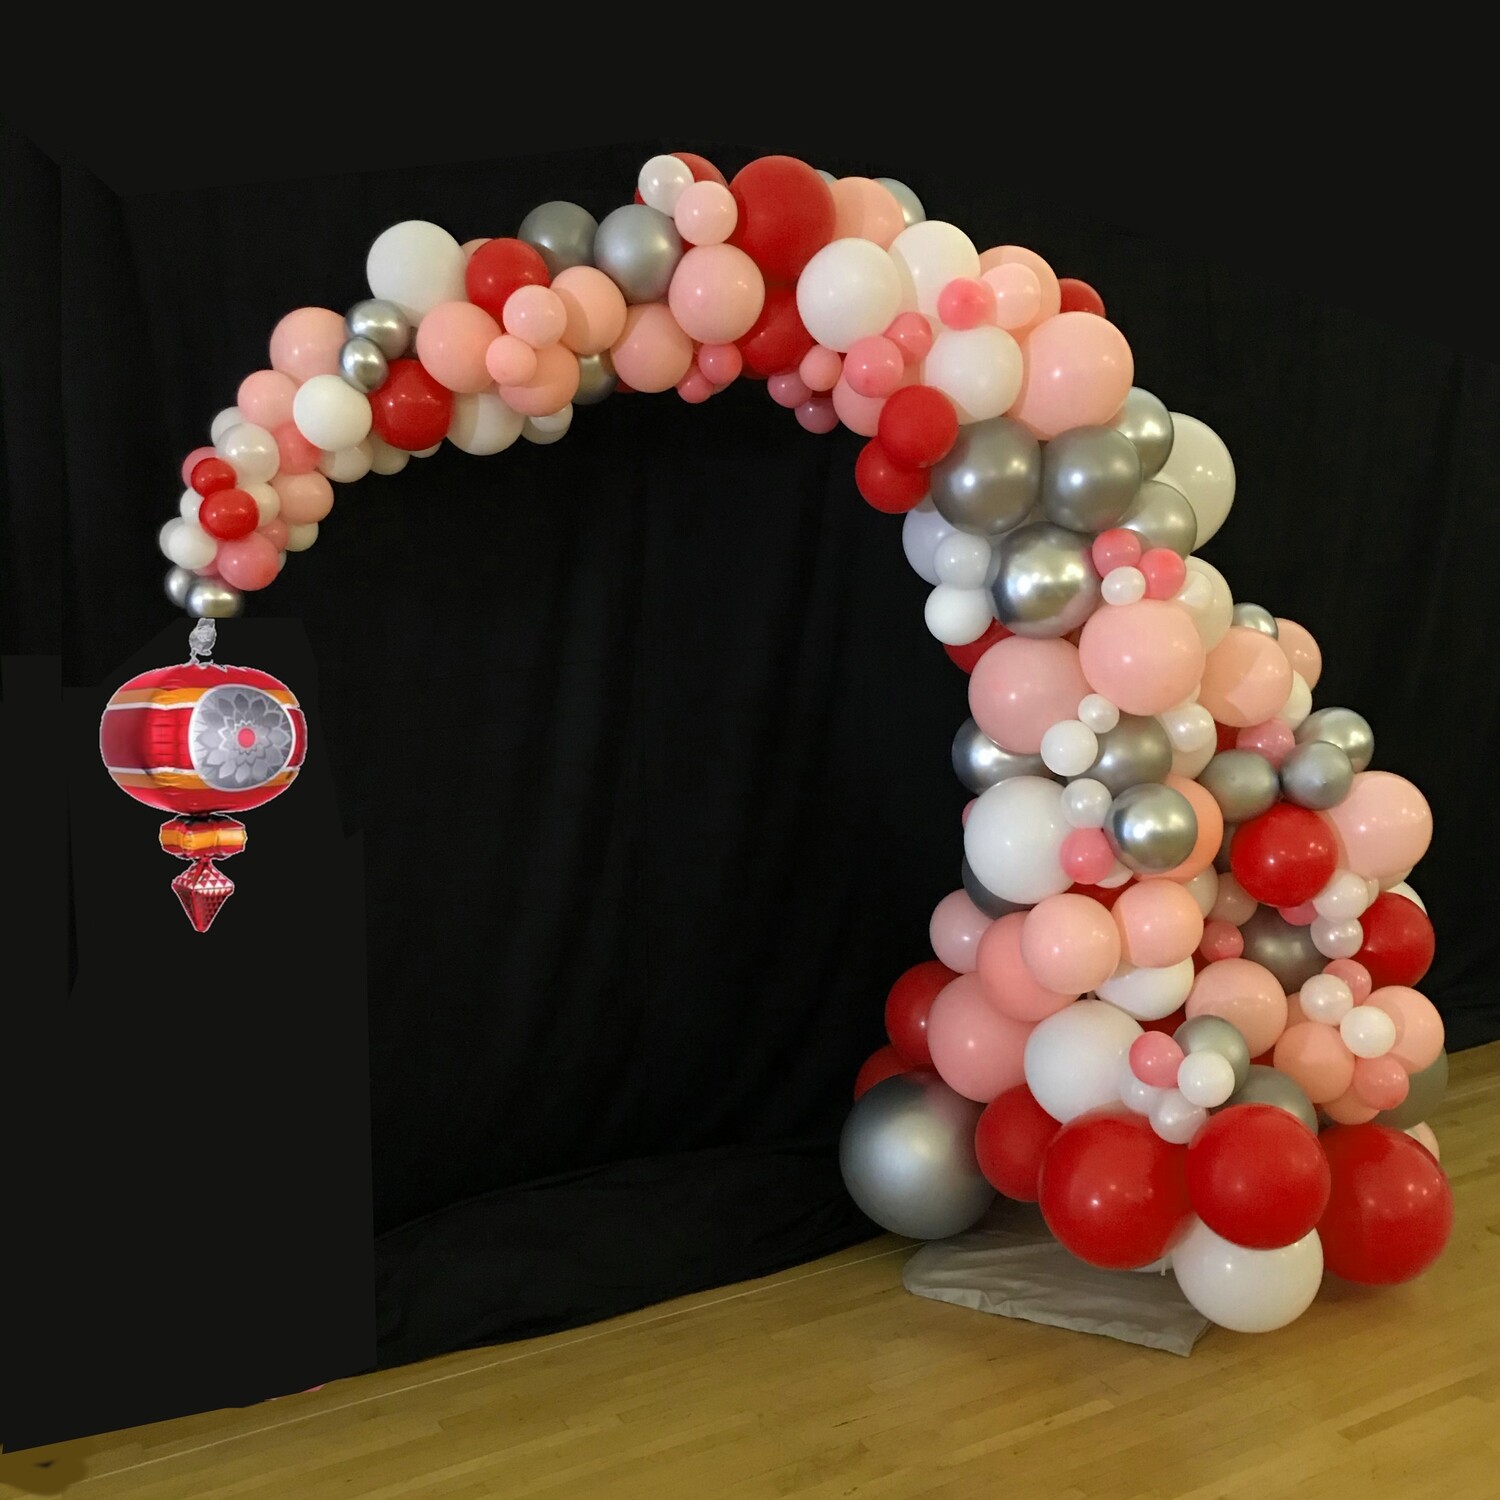 Demi balloon arch with holiday Ornament